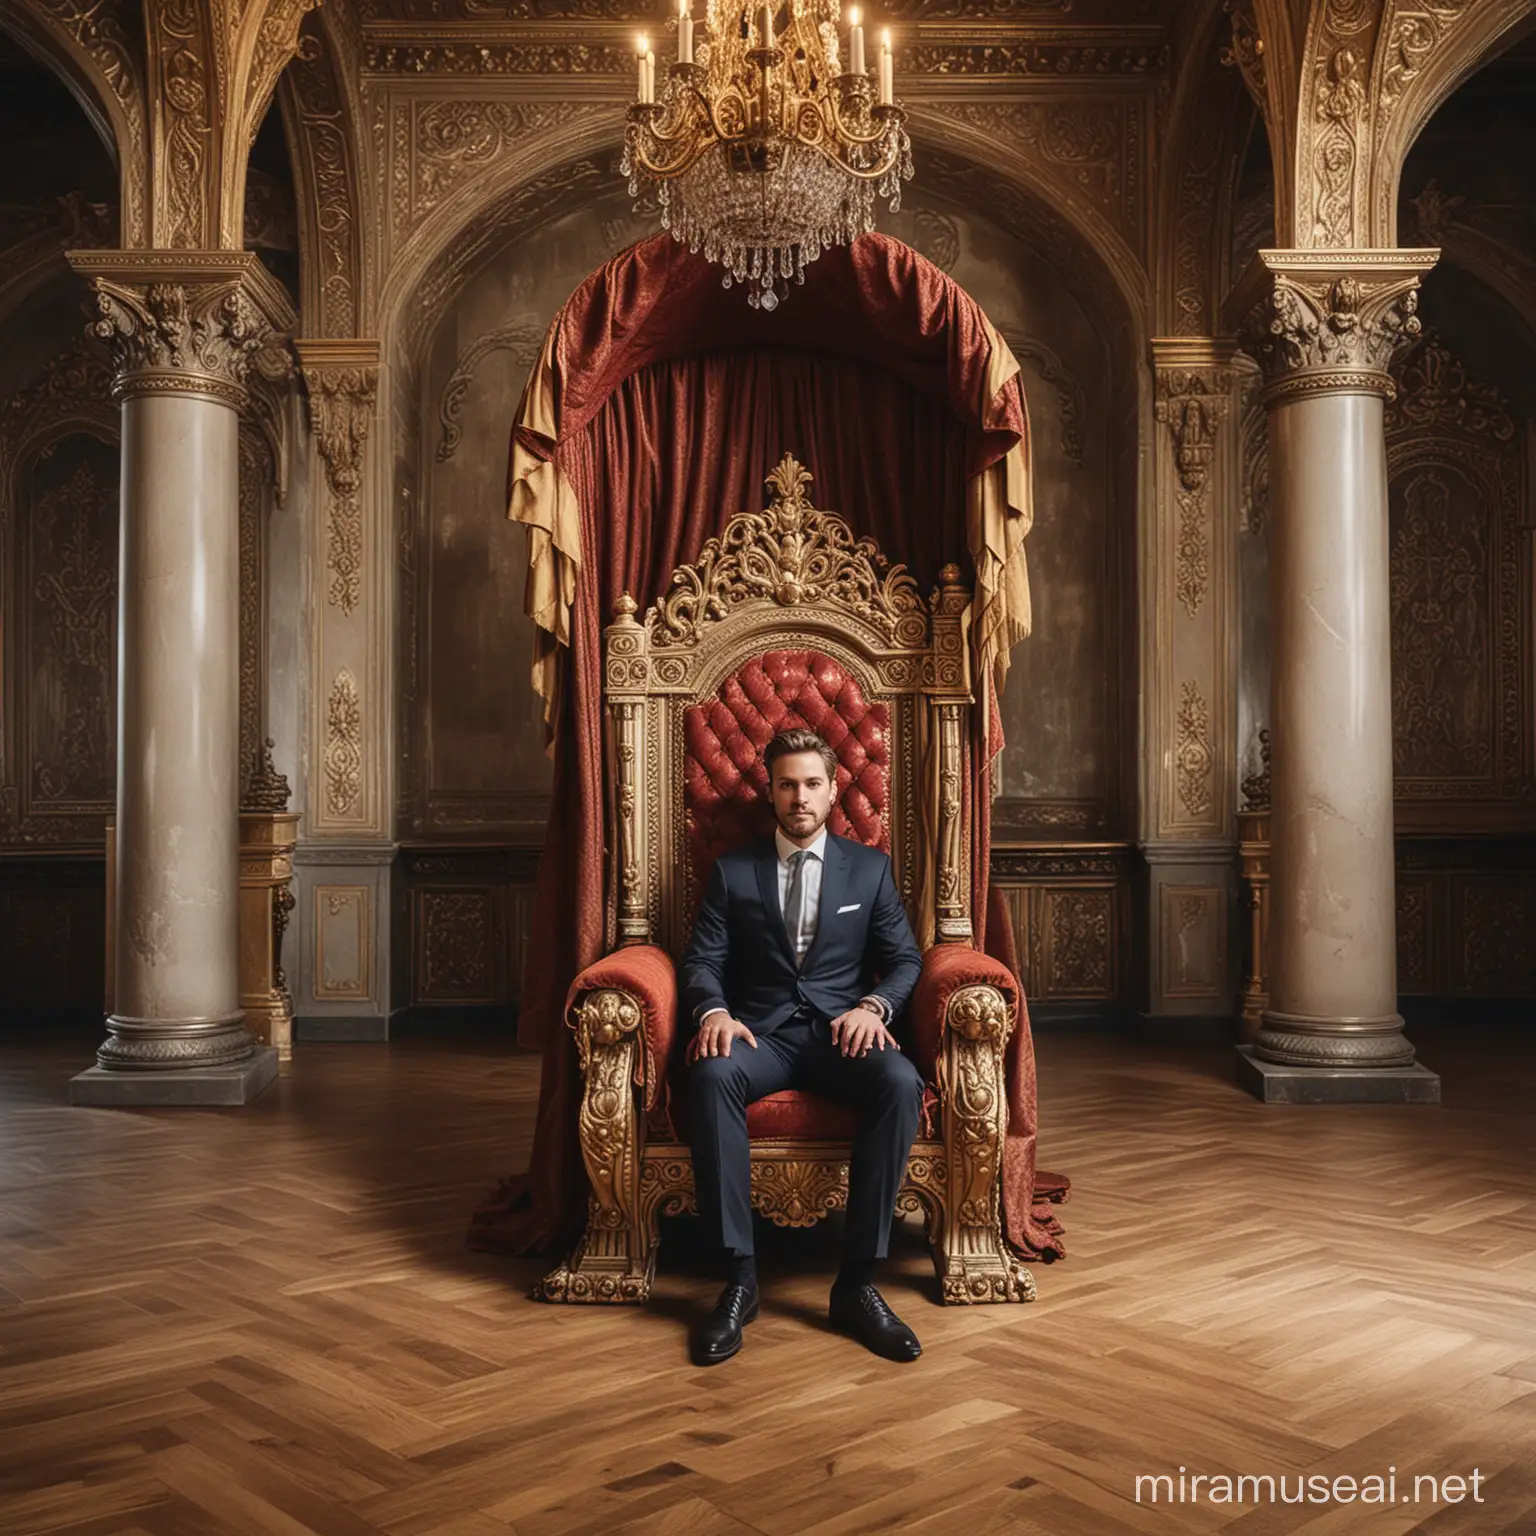 business person sitting in an extravagant royal throne in an empty room